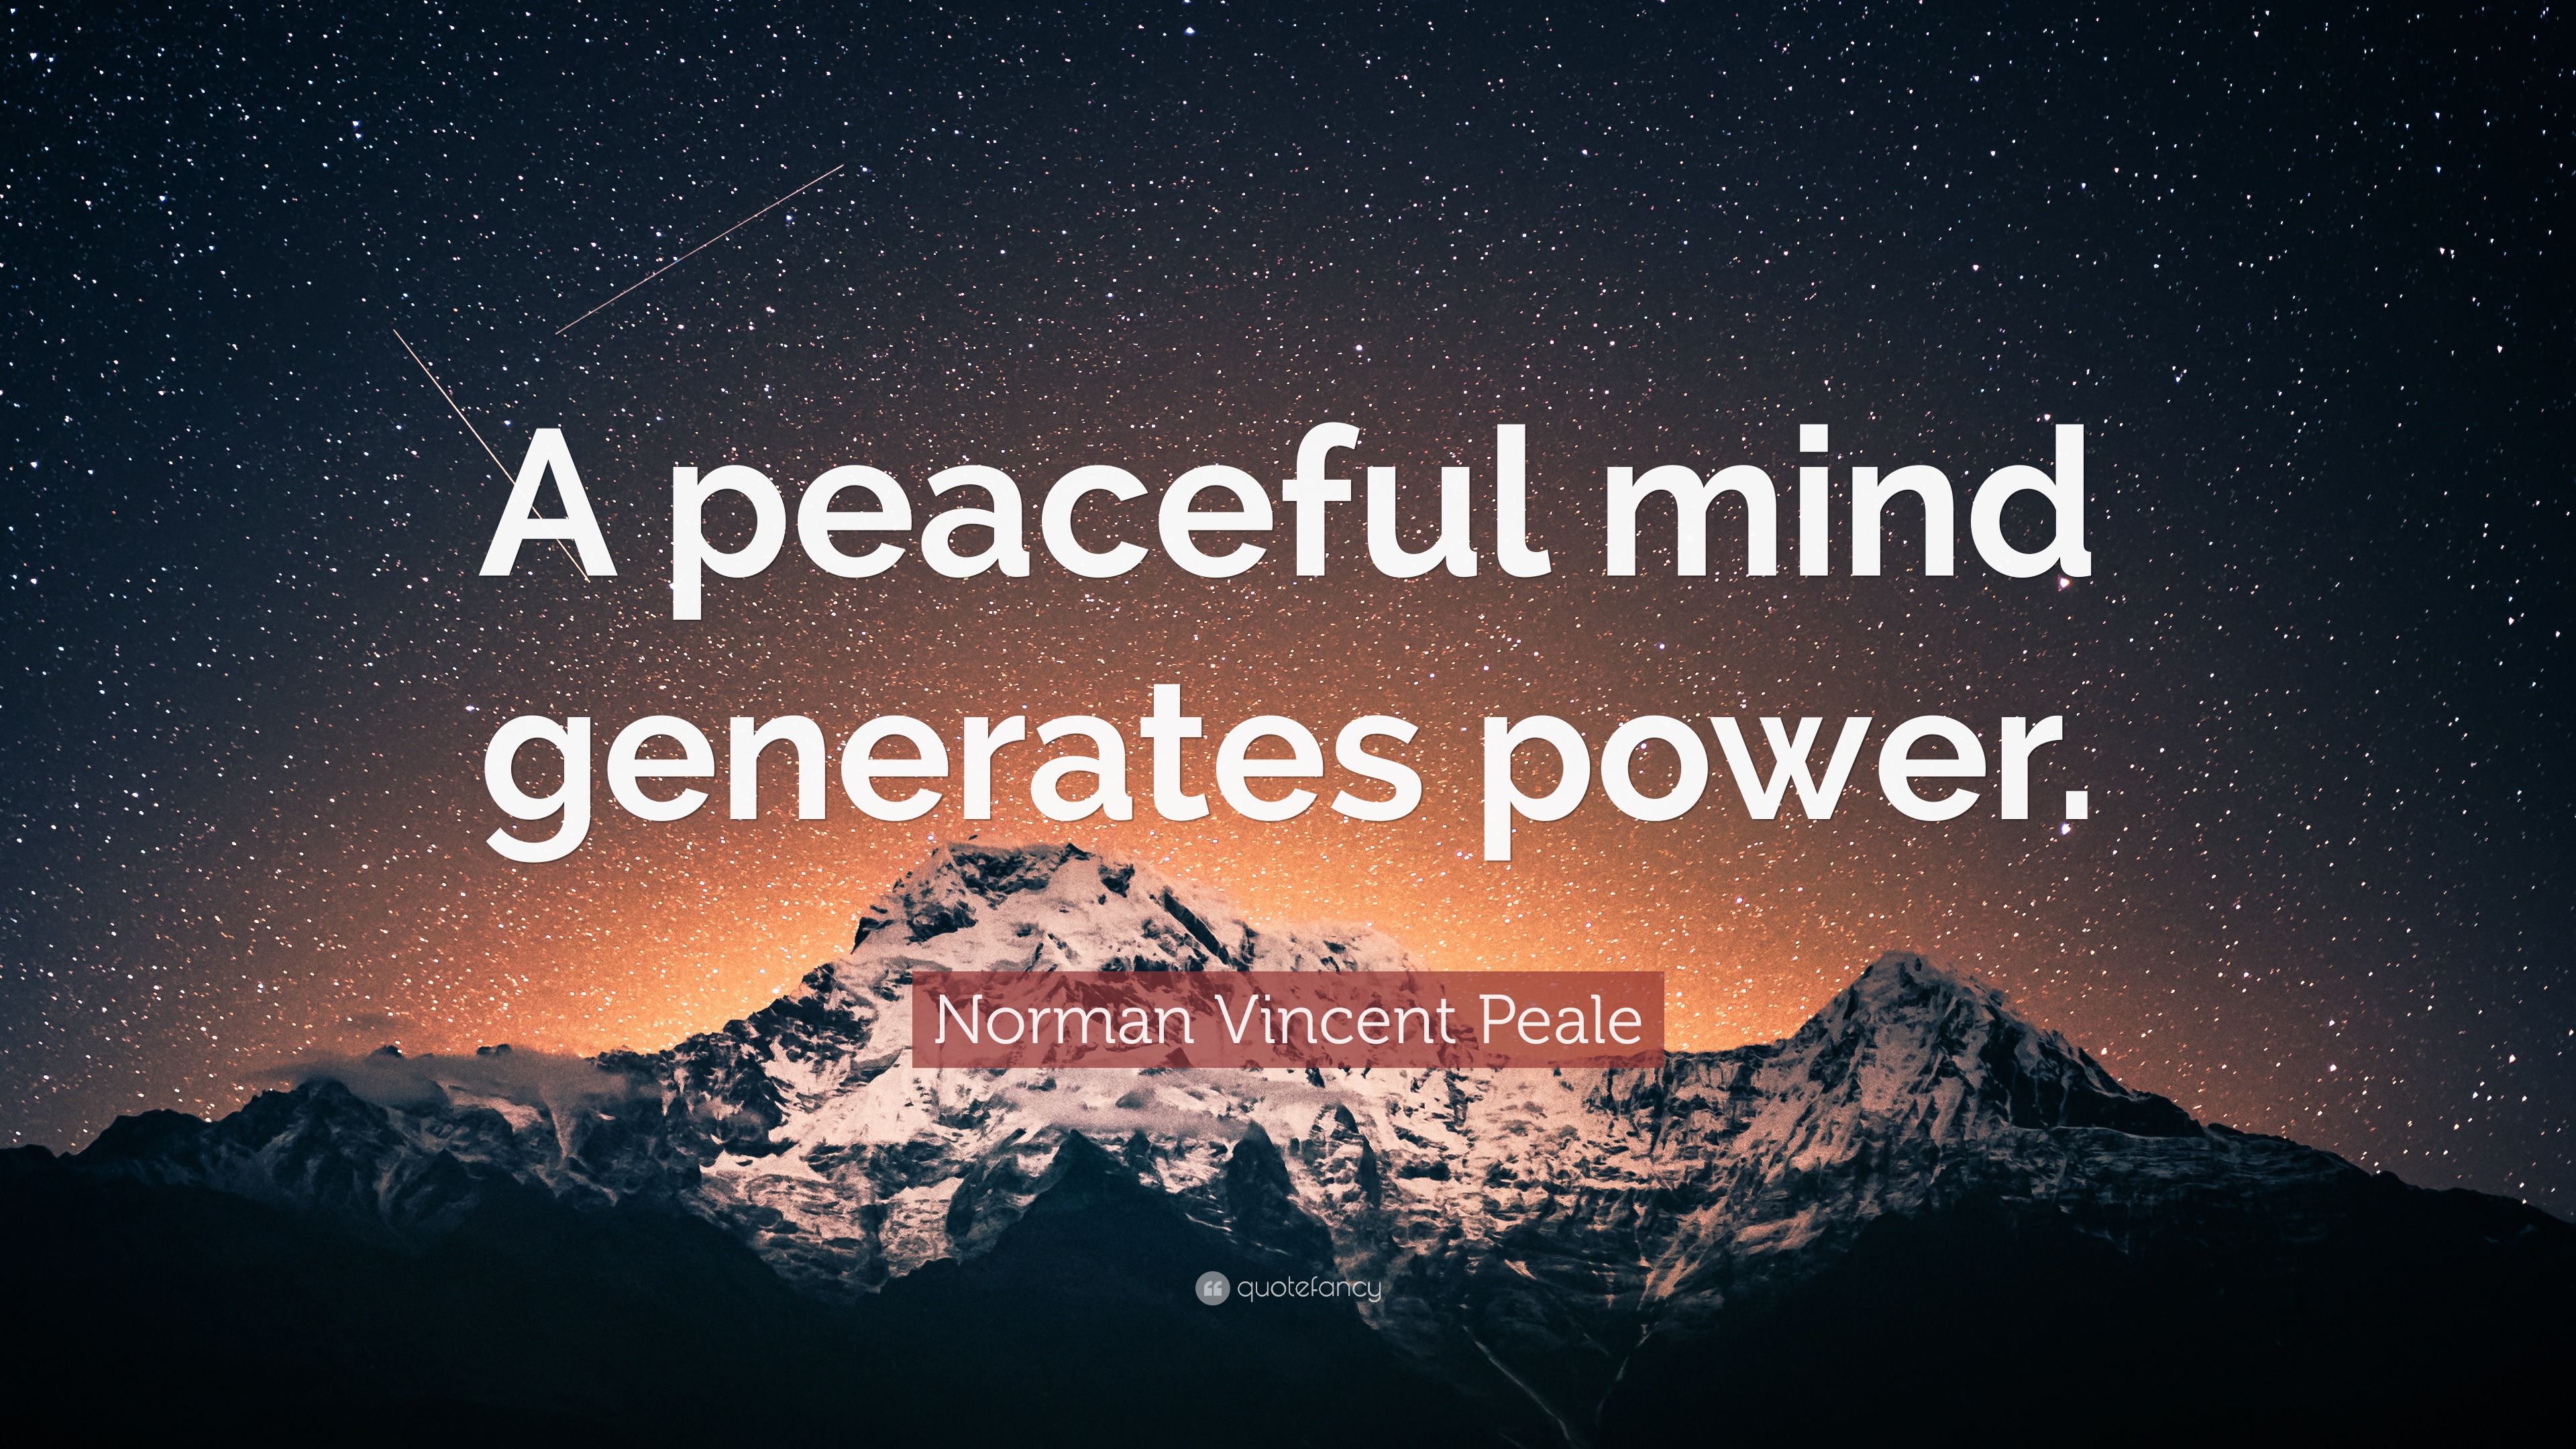 Norman Vincent Peale Quote: “A peaceful mind generates power.”